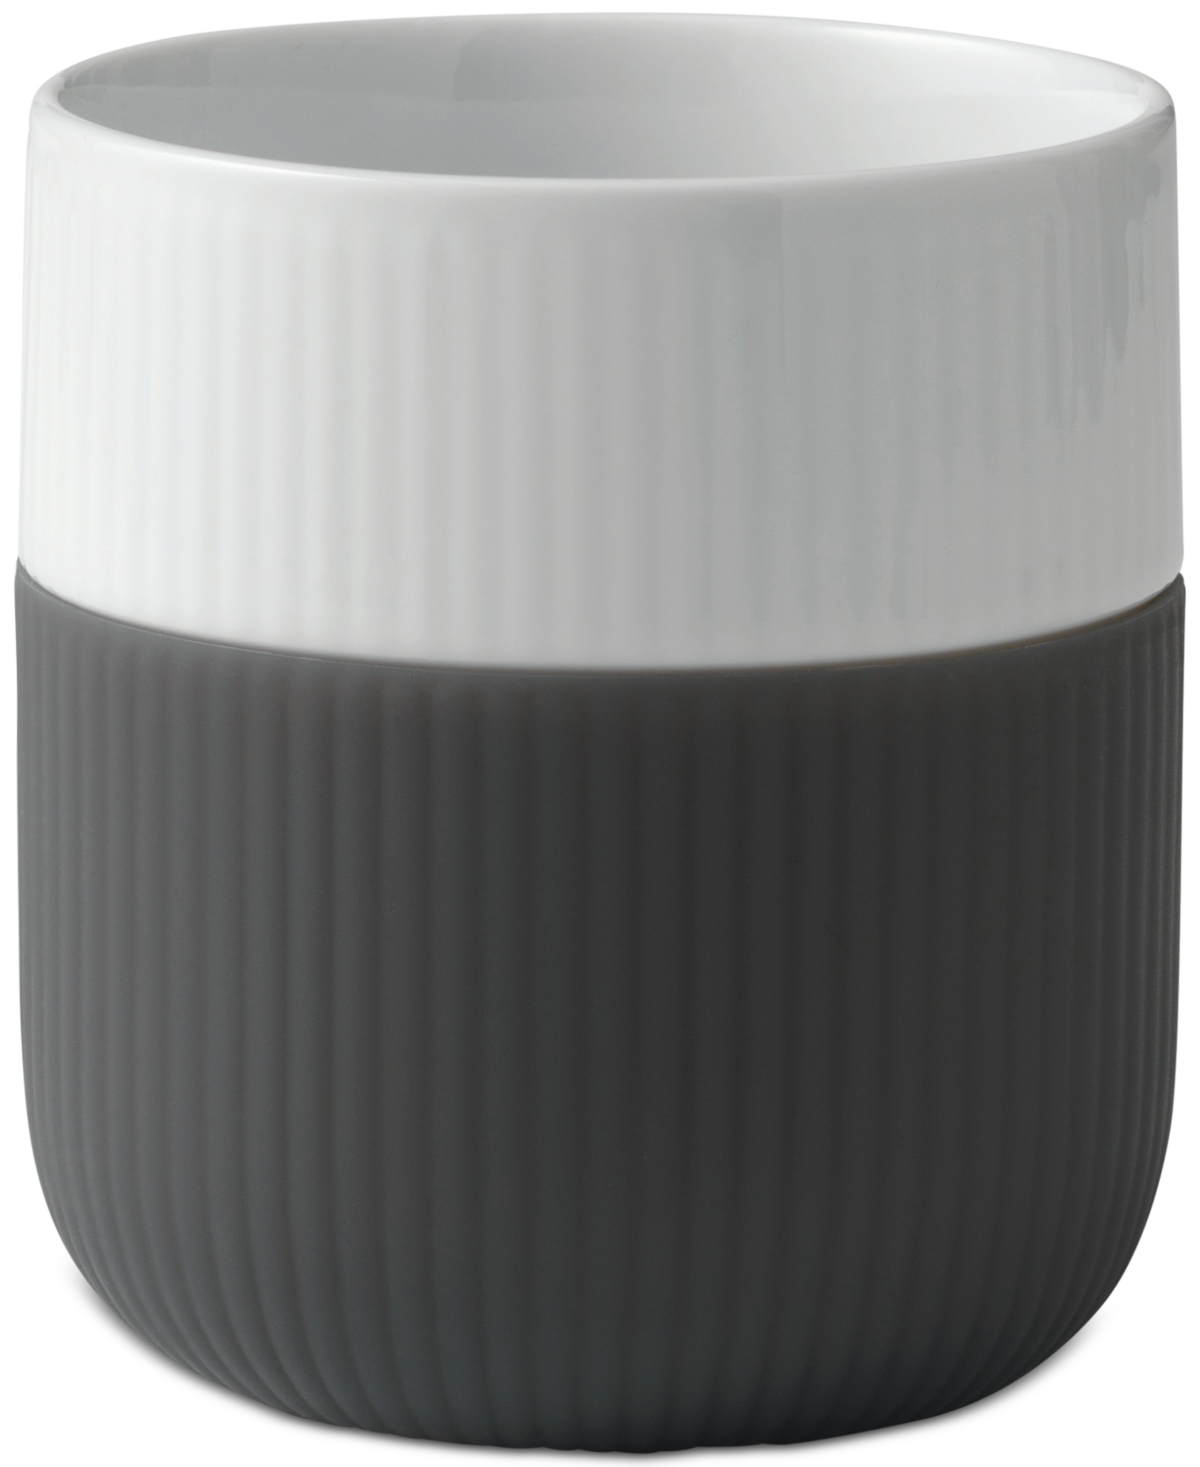 Anthracite Fluted Contrast Mug - Two-tone